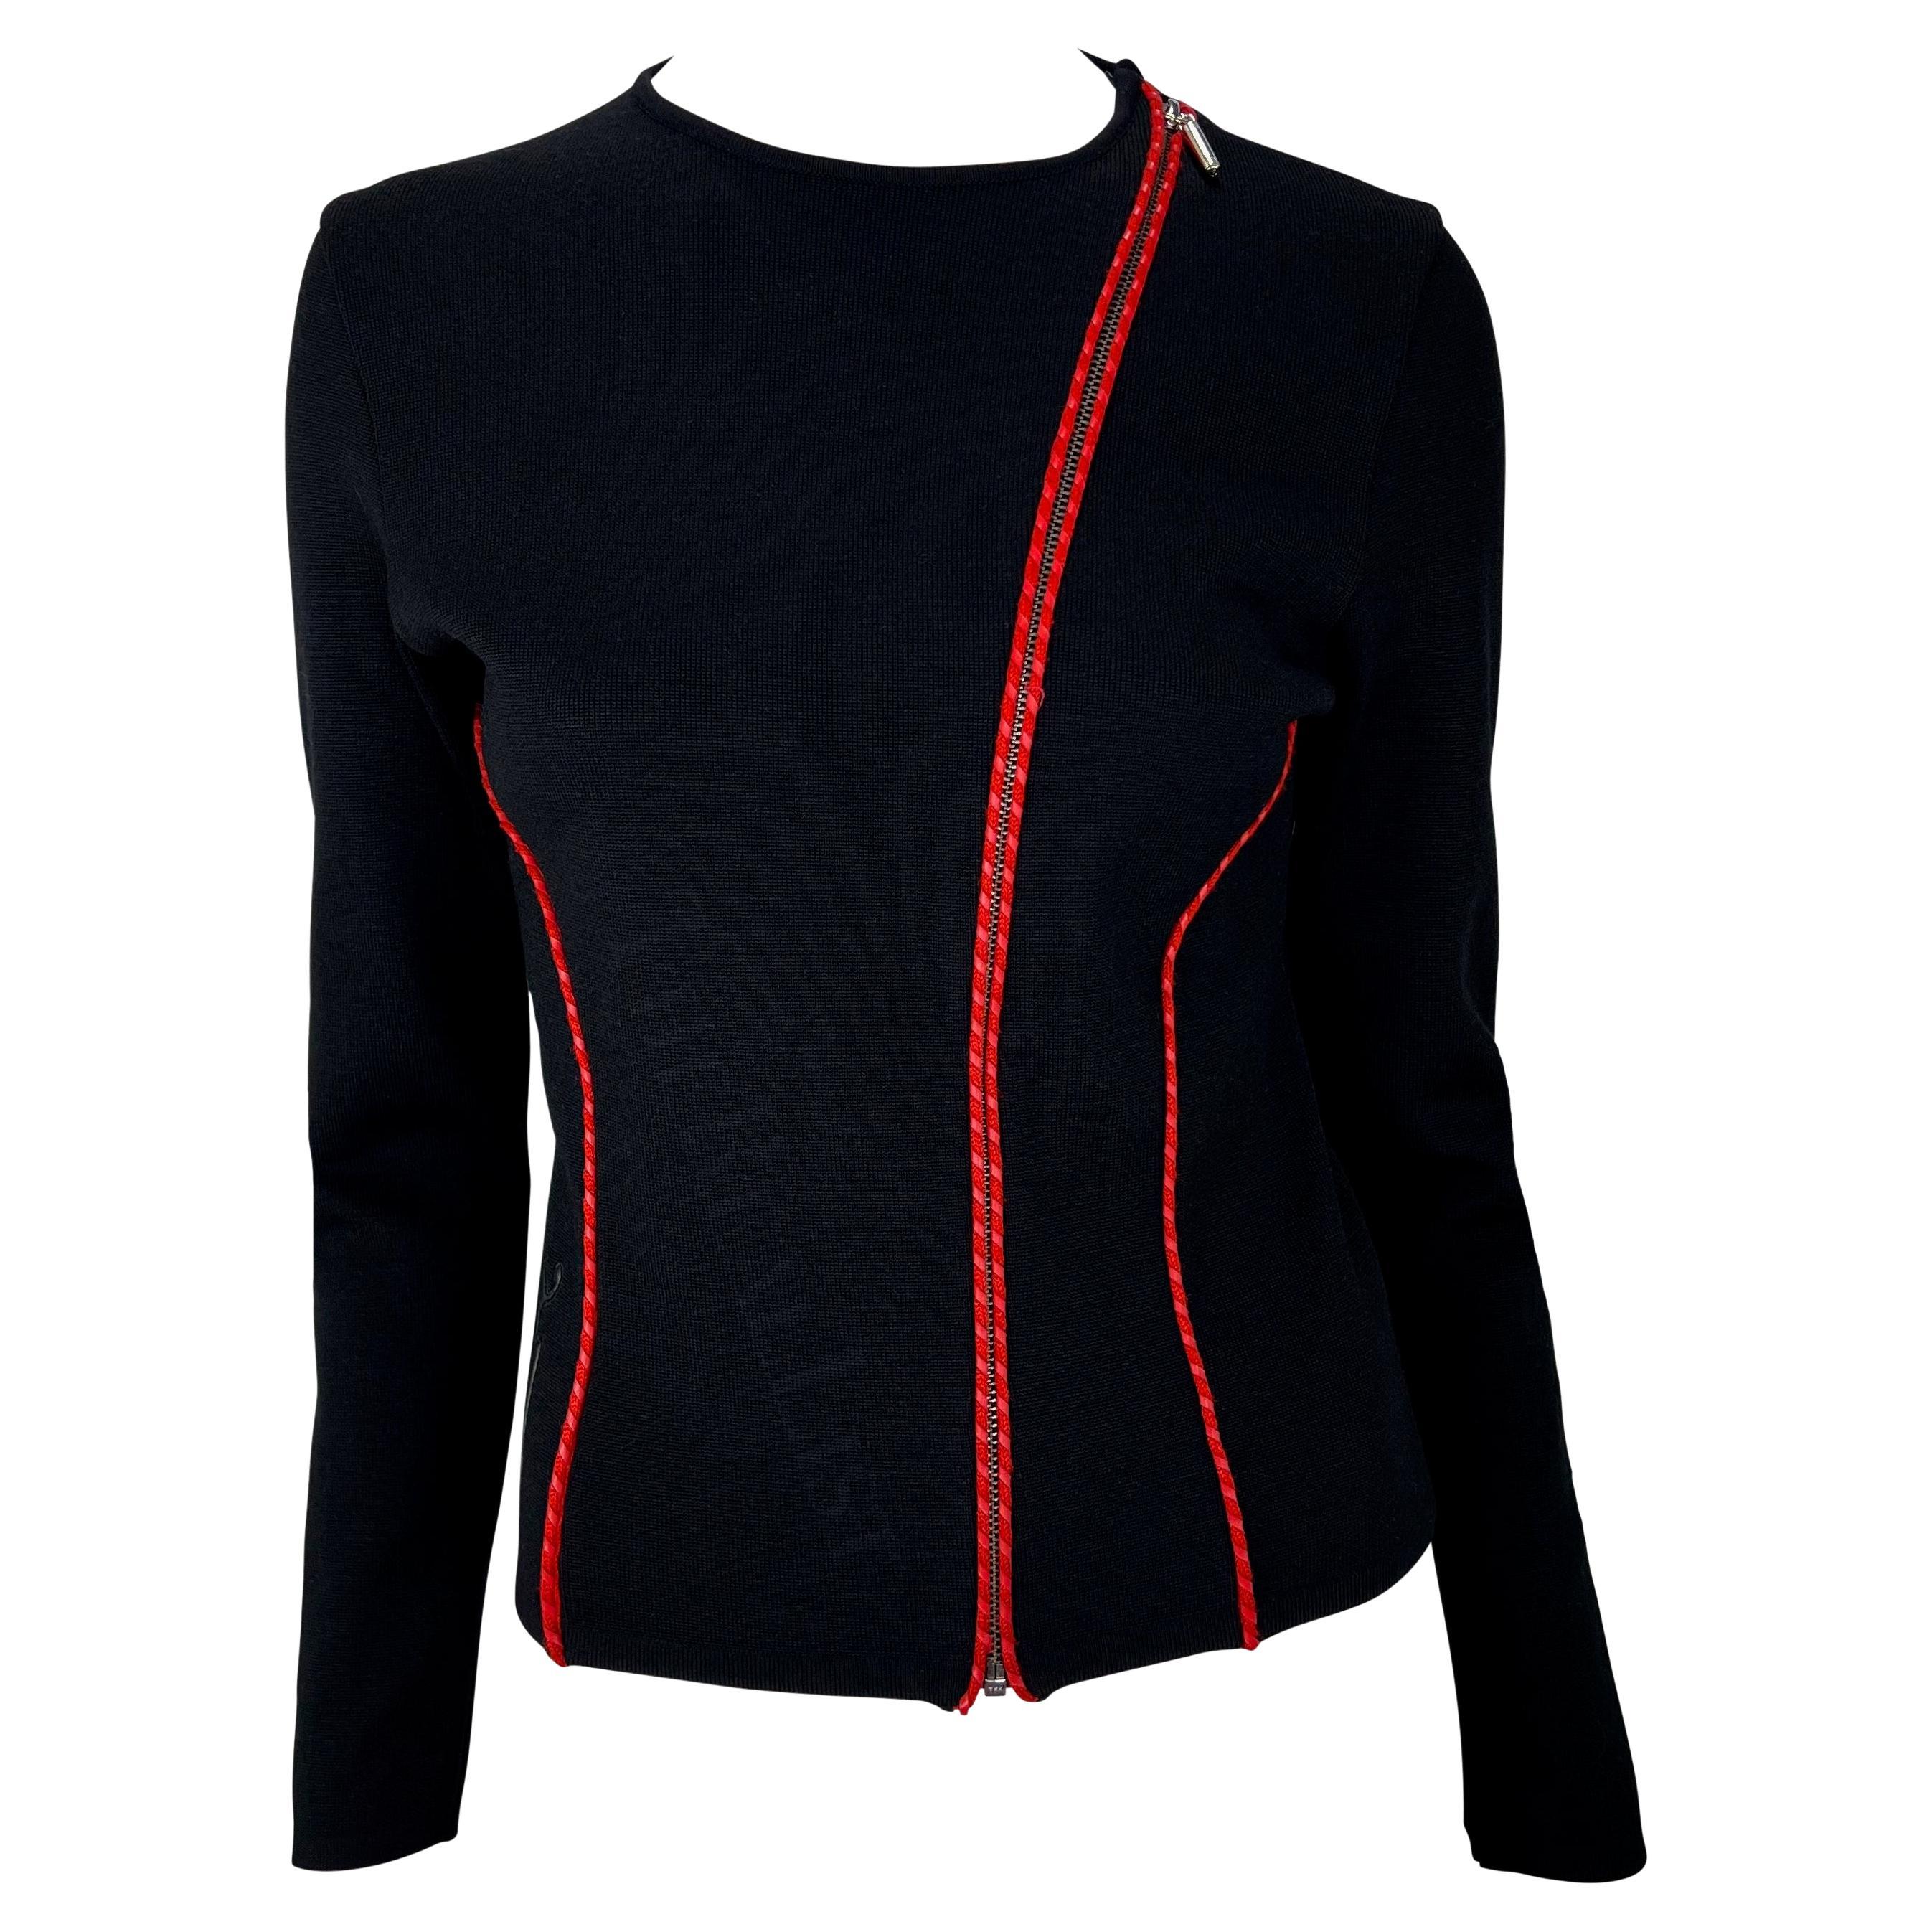 Presenting a fabulous black knit Gianni Versace sweater top, designed by Donatella Versace. From the early 2000s, this black sweater features an asymmetrical zipper at the front, red leather details, and a leather 'DV' appliqué at one side. The